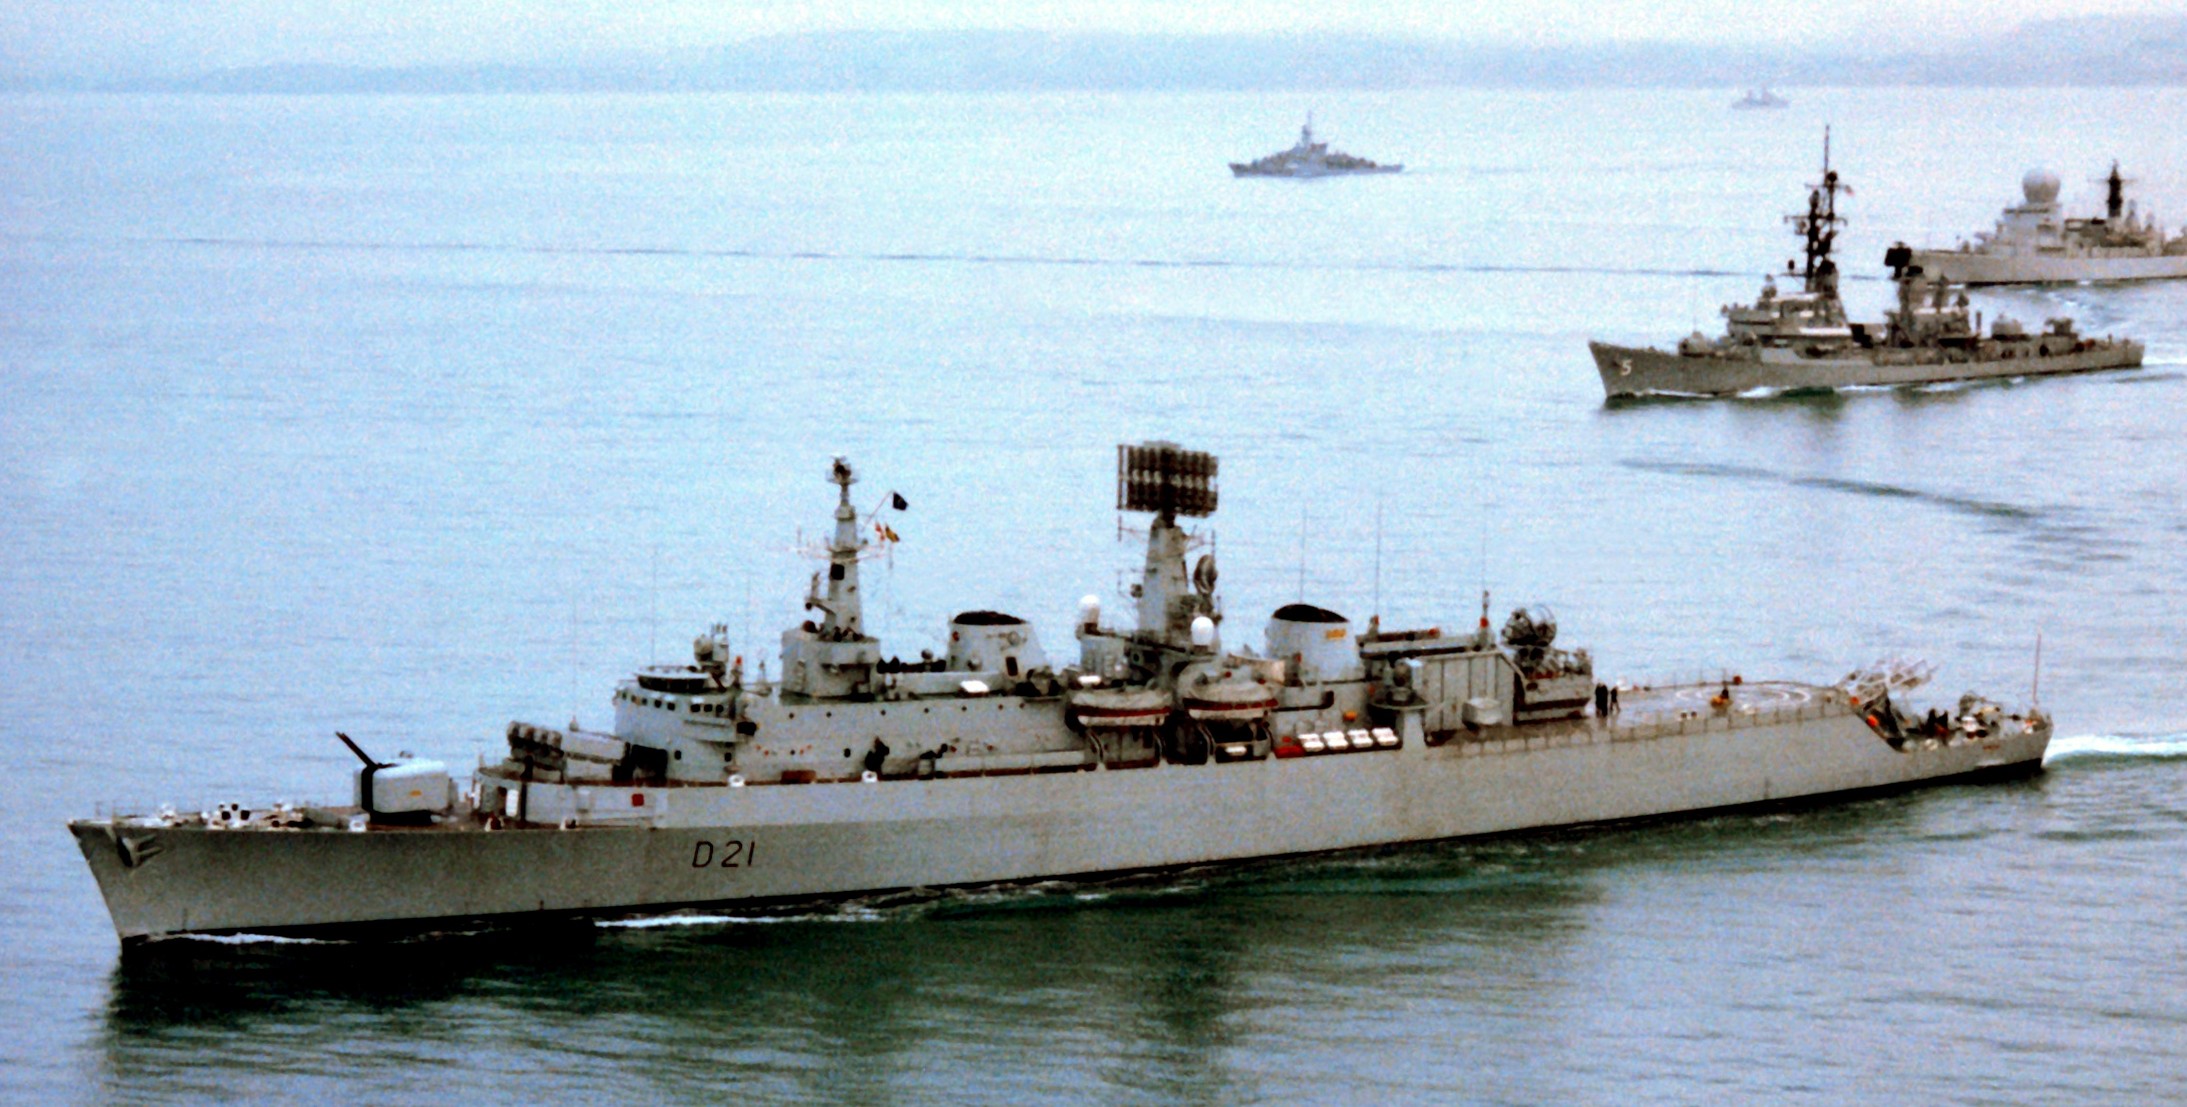 county class guided missile destroyer royal navy d 21 hms norfolk